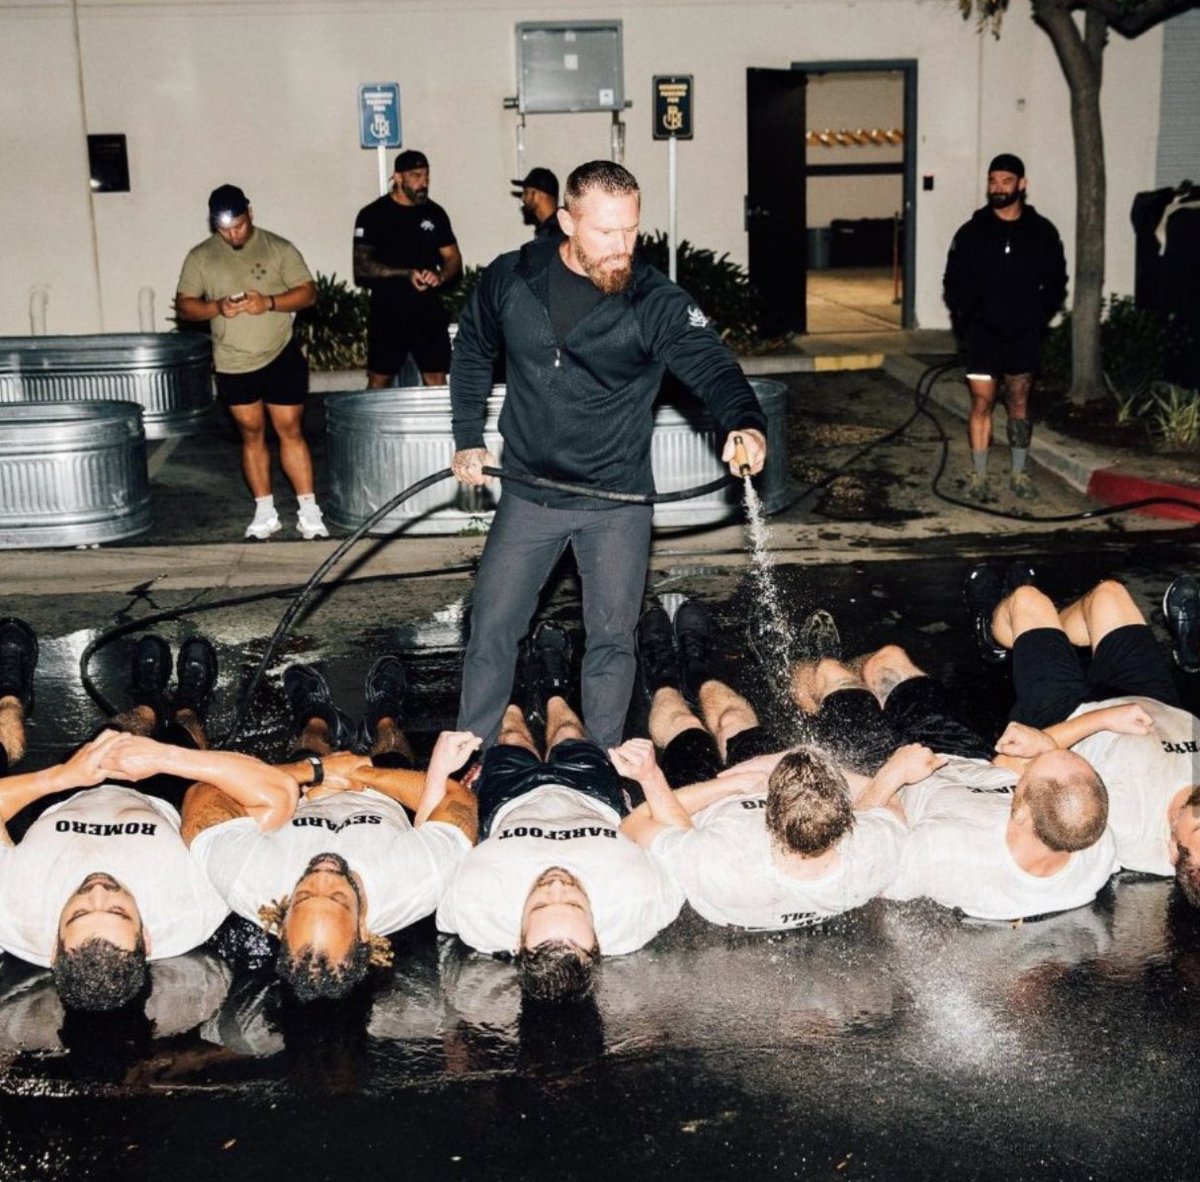 A three-day 'alpha male boot camp' is seeing attendees mocked online for paying $18,000 to endure military grade inspired punishments